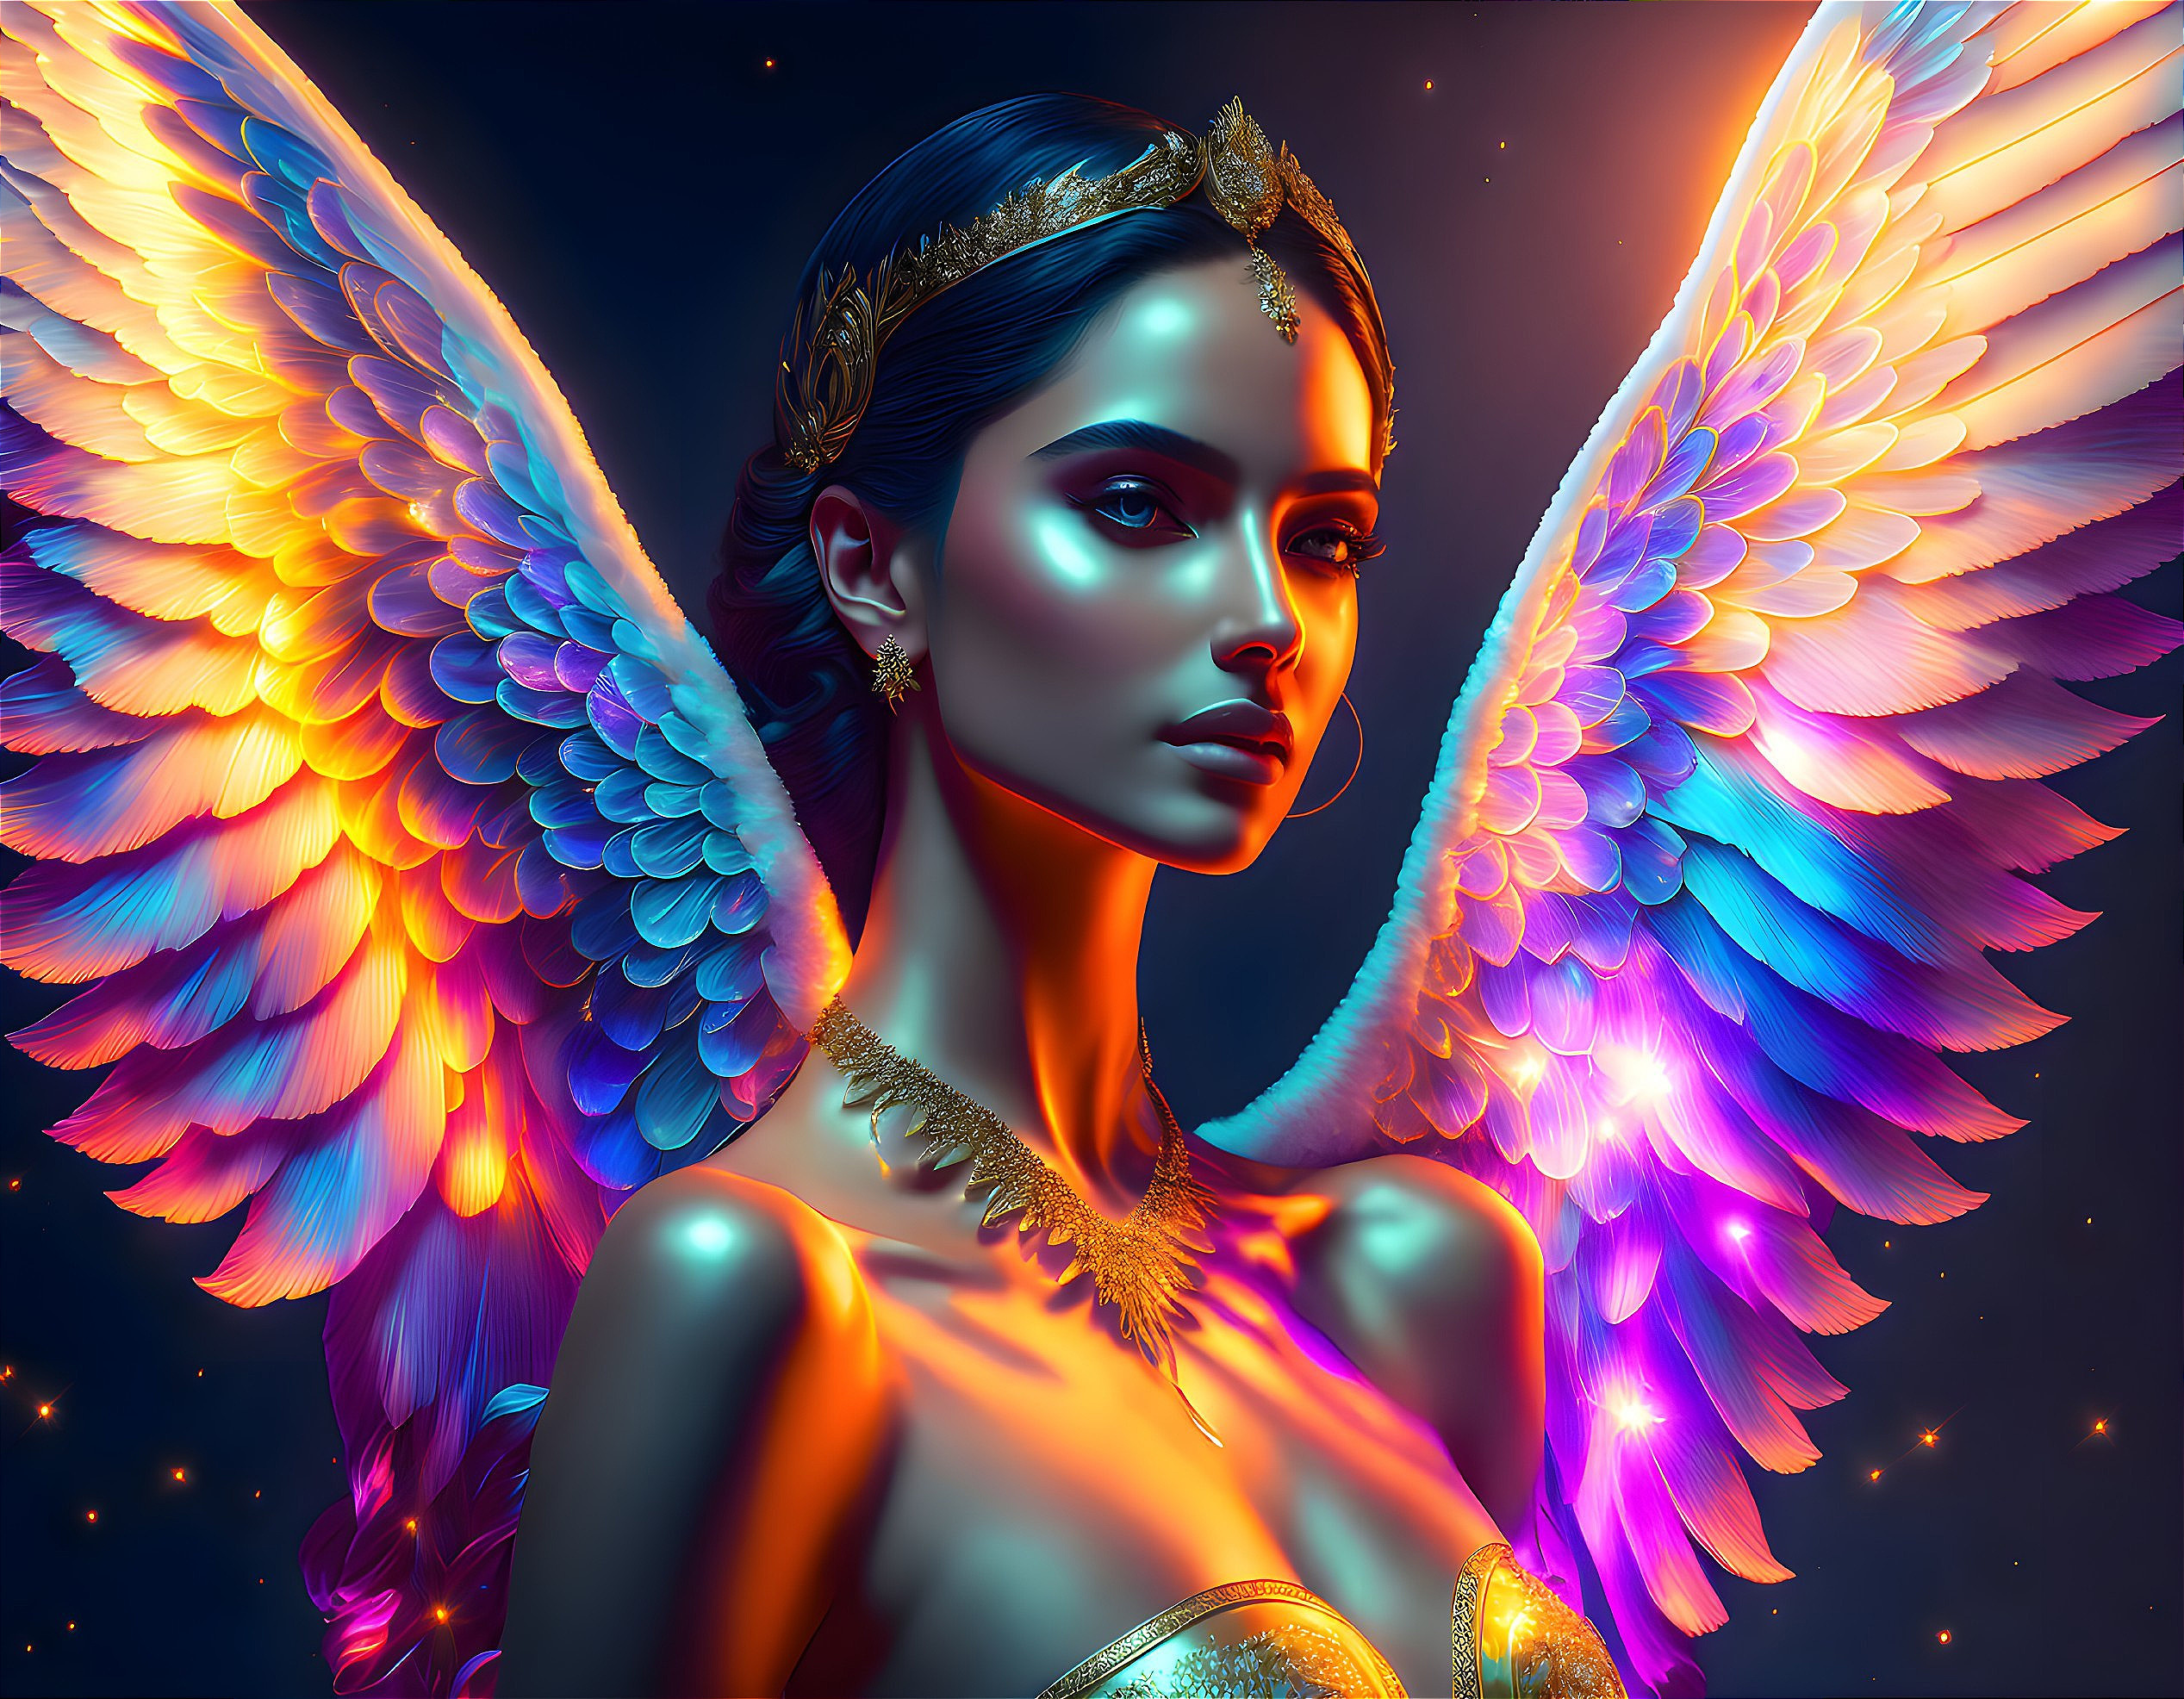 Exquisitely beautiful angel adorned with gold